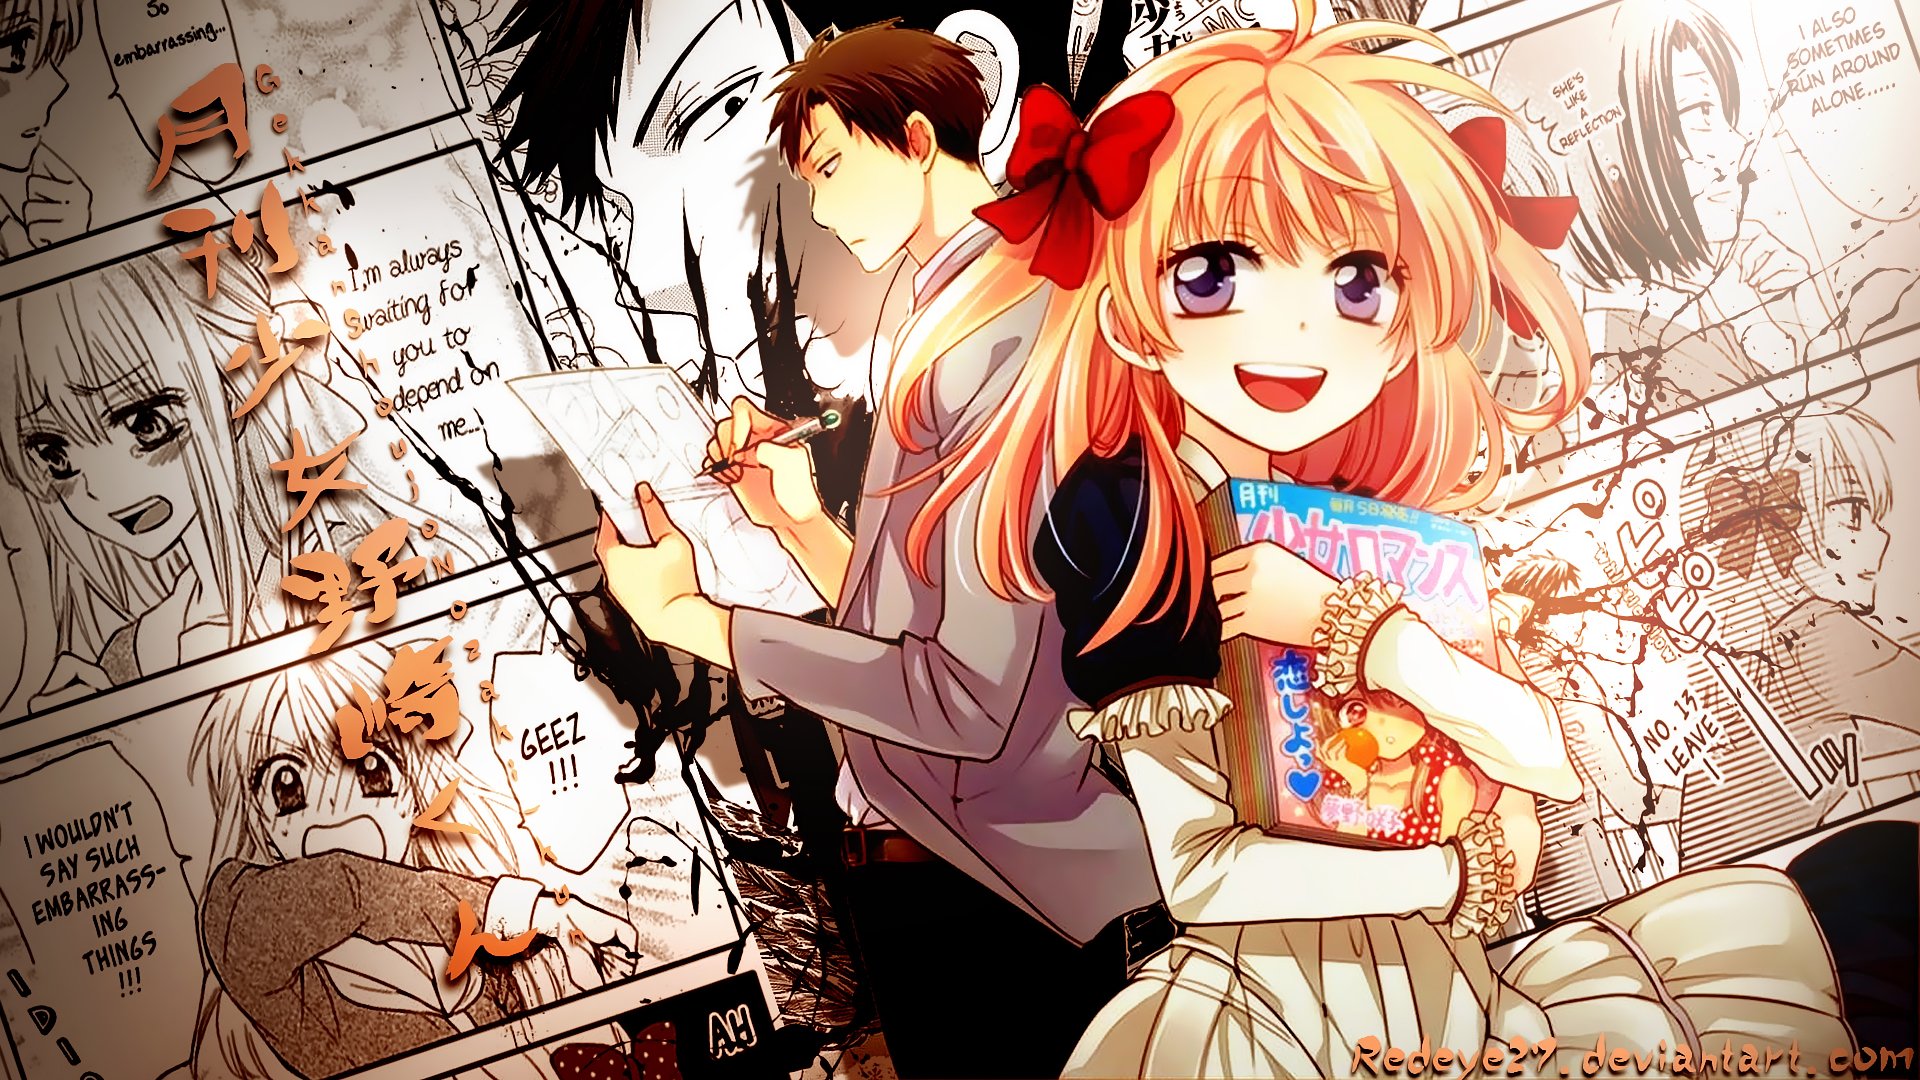 50 Monthly Girls Nozaki Kun Hd Wallpapers Background Images Images, Photos, Reviews